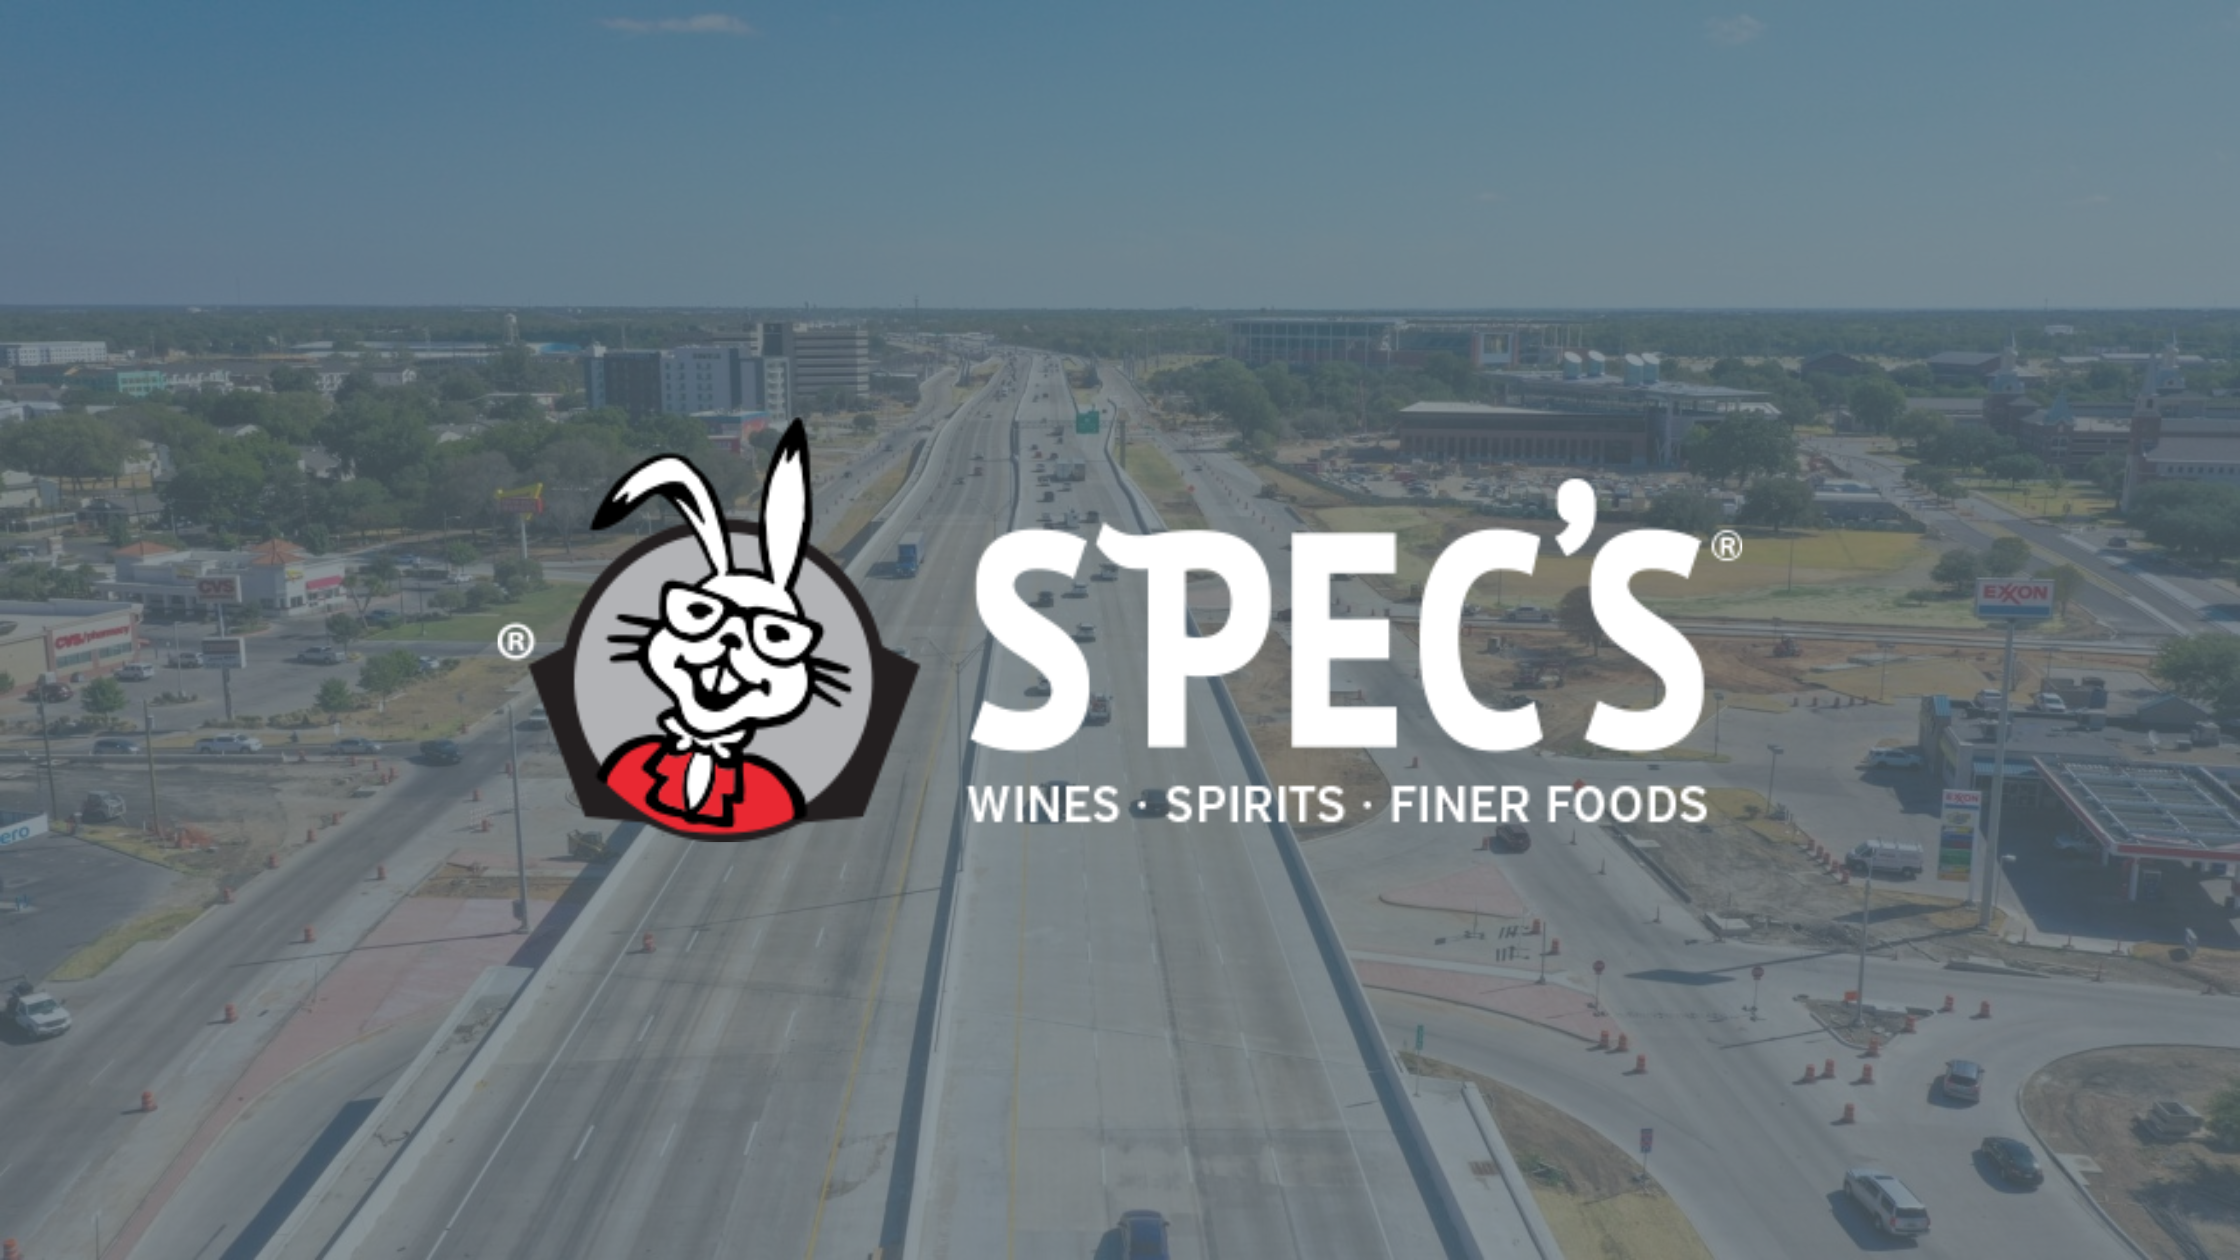 Word on the Street | Raise a Glass to the New Spec’s Wines, Spirits & Finer Foods Location in Waco!